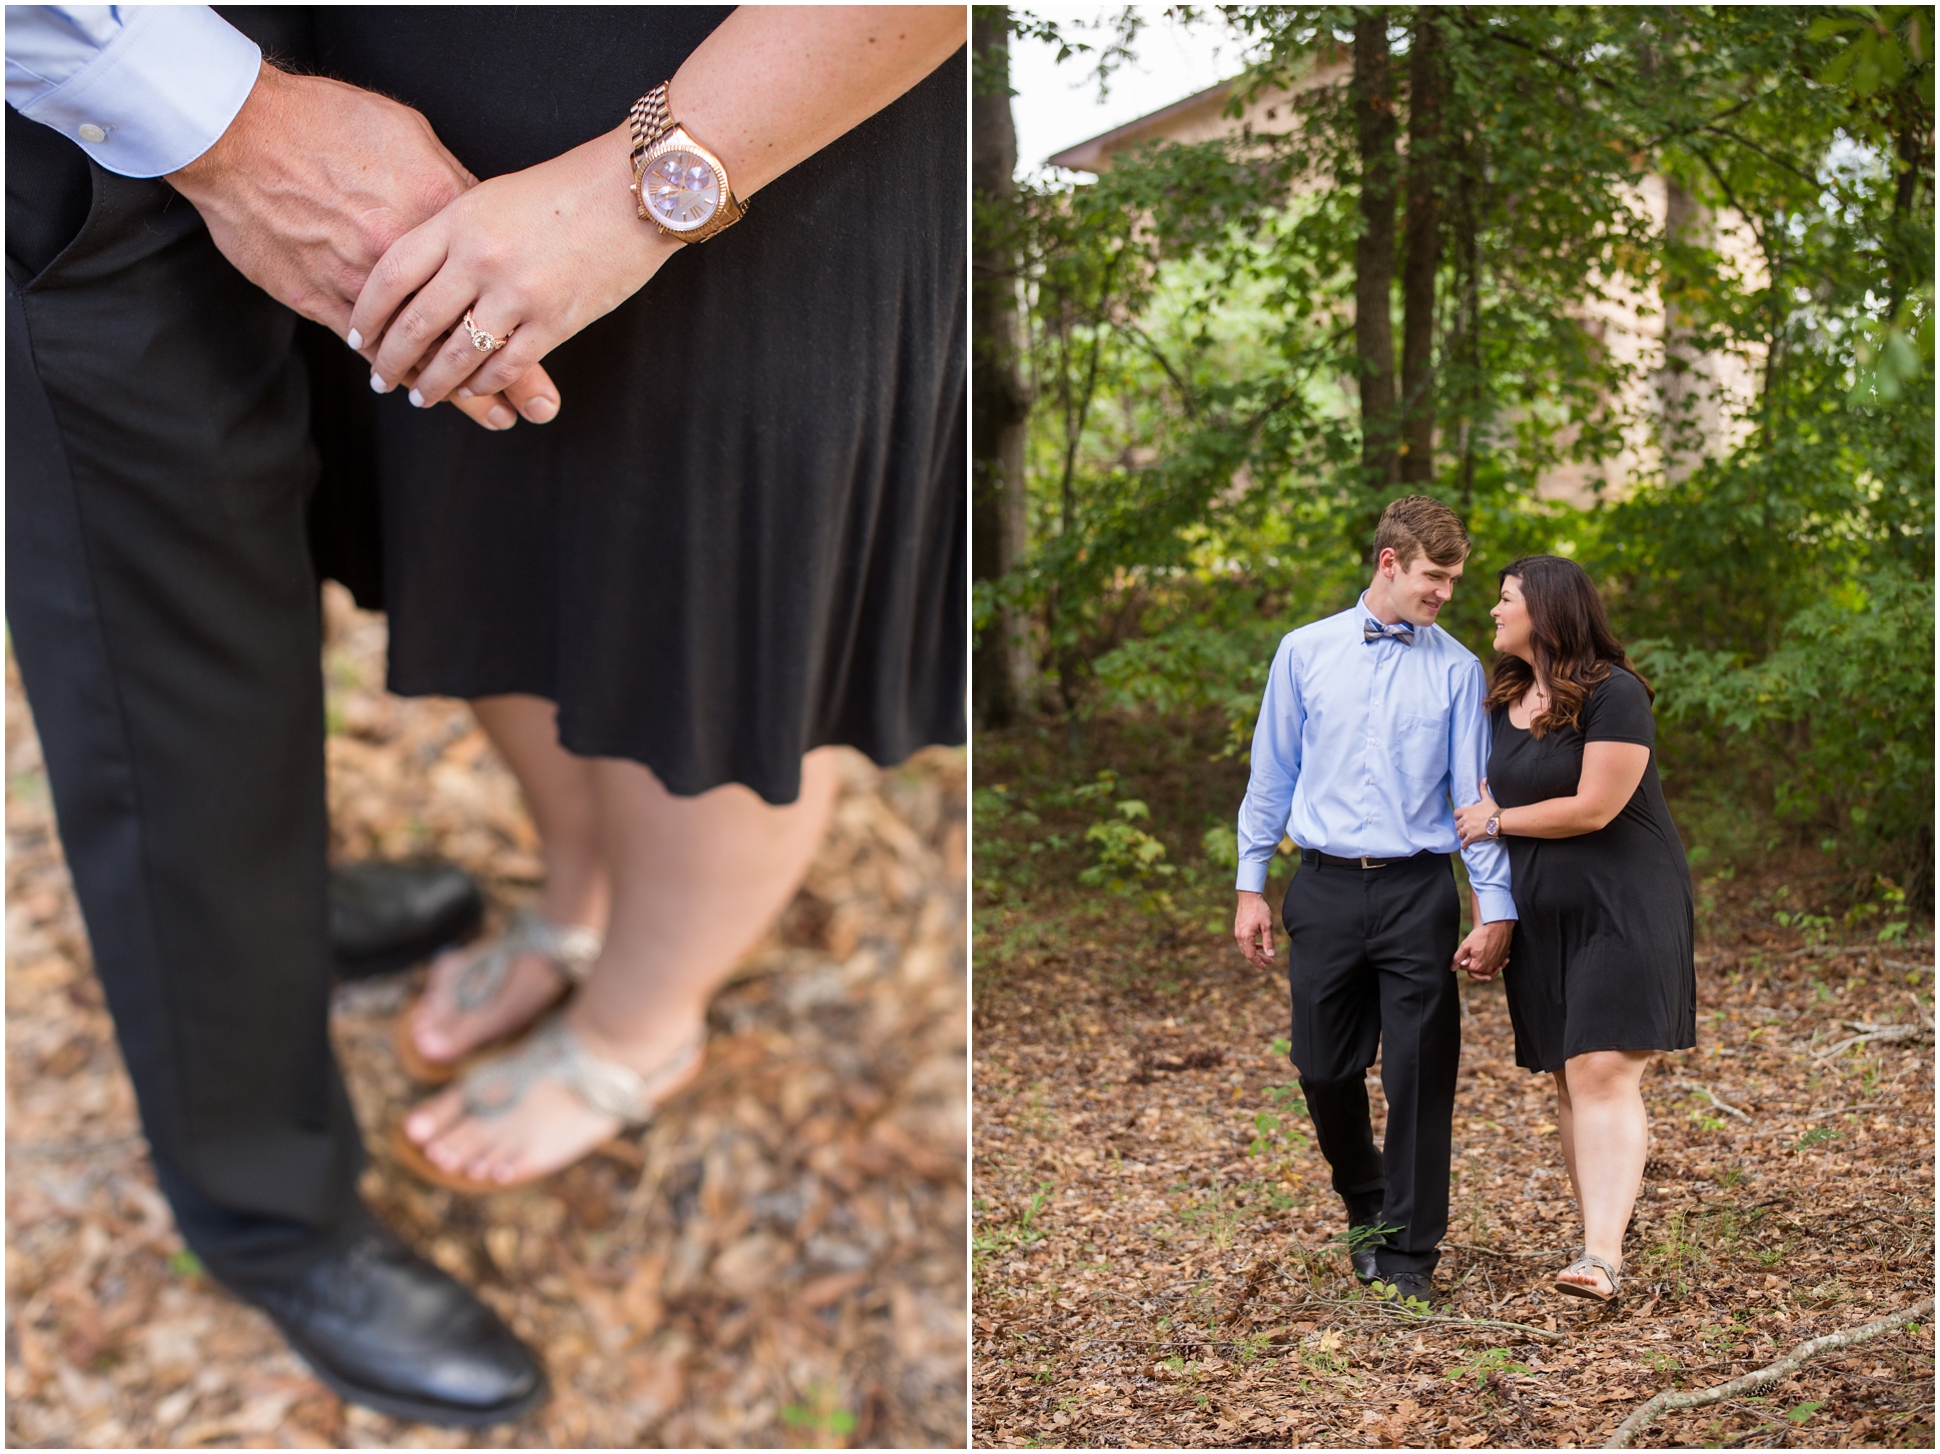 Surprise Engagement Proposal | Two Chics Photography | www.twochicsphotography.com